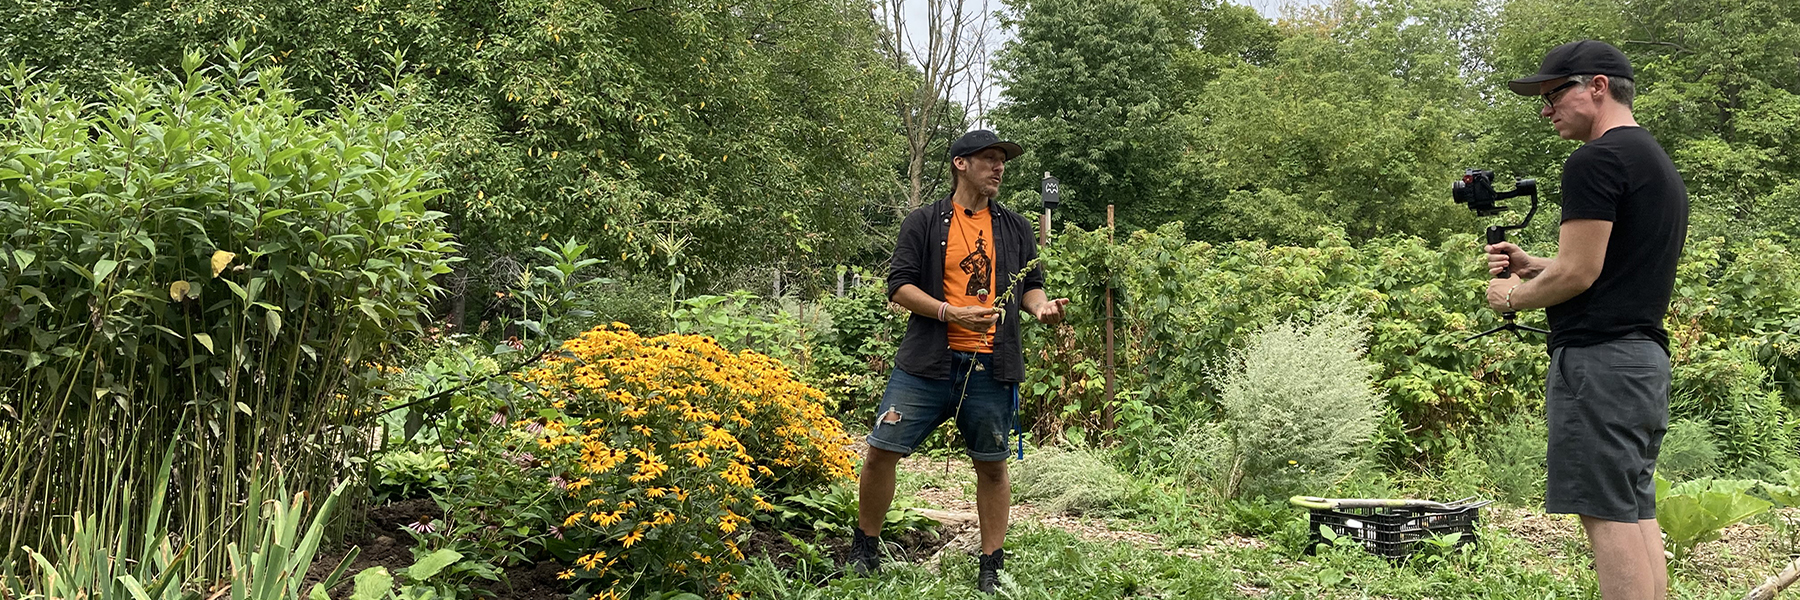 Joce TwoCrows from SweetGrass Roots Collective teaching at the The Black Creek Community Farm